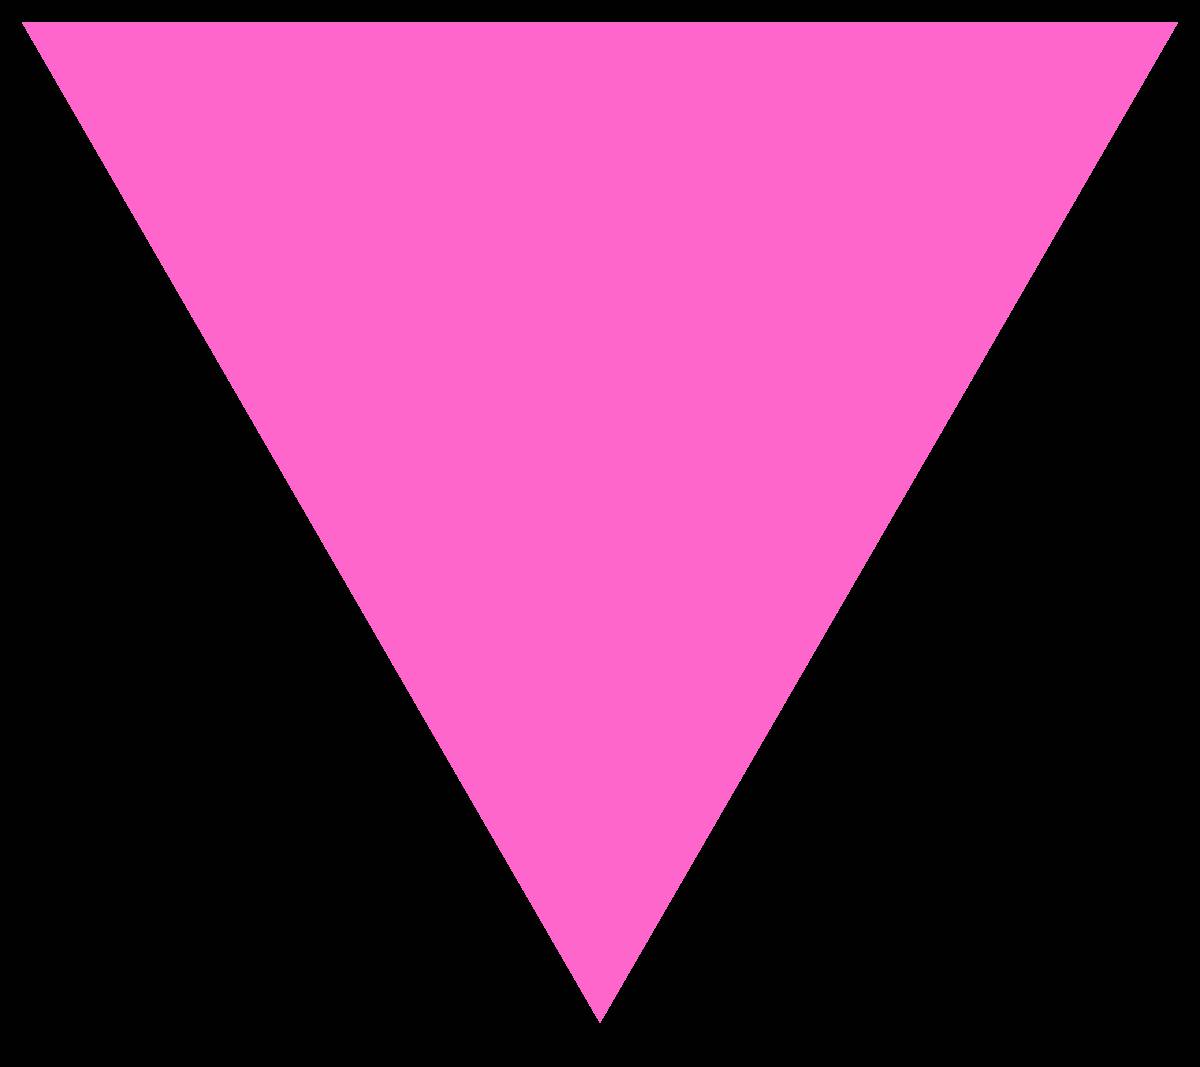 Pink Triangle Export Improved